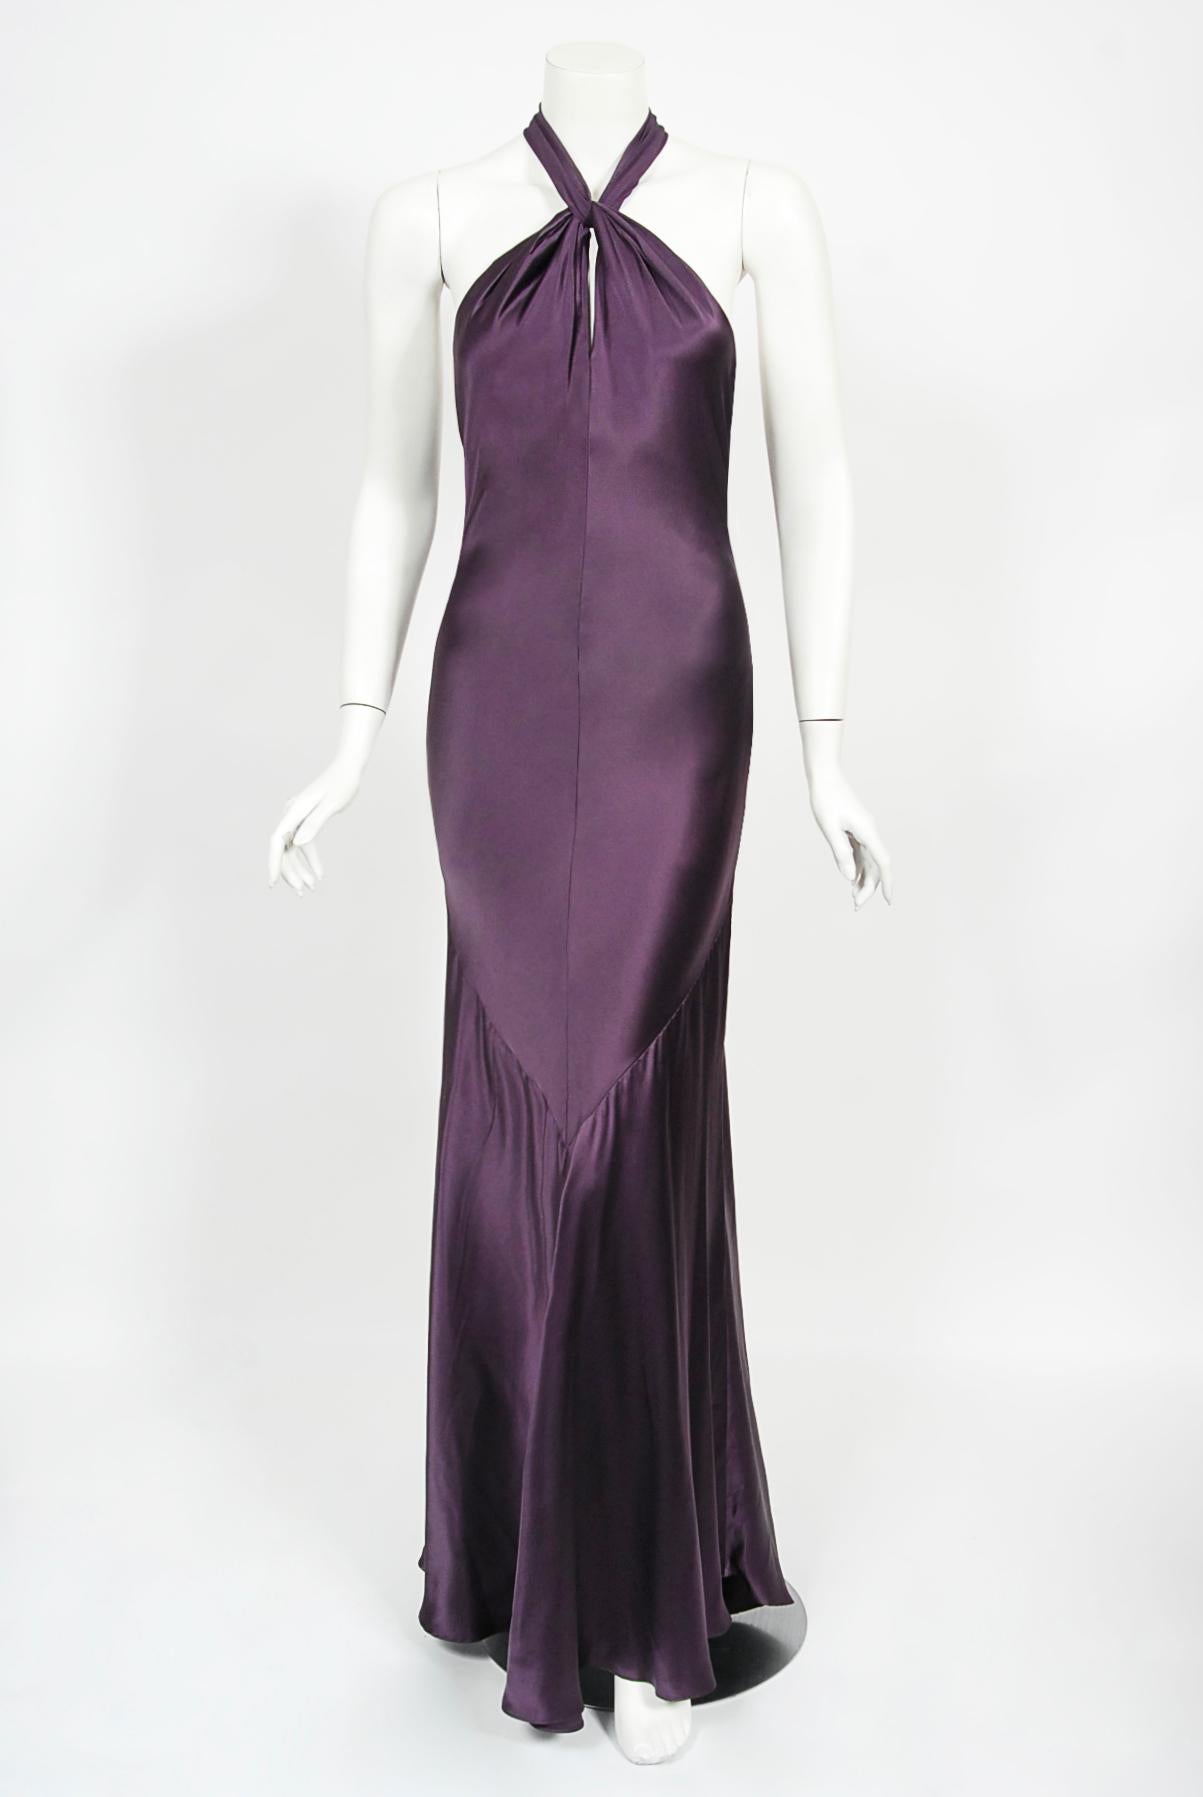 An exceptional and incredibly elegant Gianni Versace plum purple silk bias-cut gown dating back to the iconic 1998 spring-summer collection. Versace’s creations were enjoyed by the super wealthy but his impact was felt across a wider section of